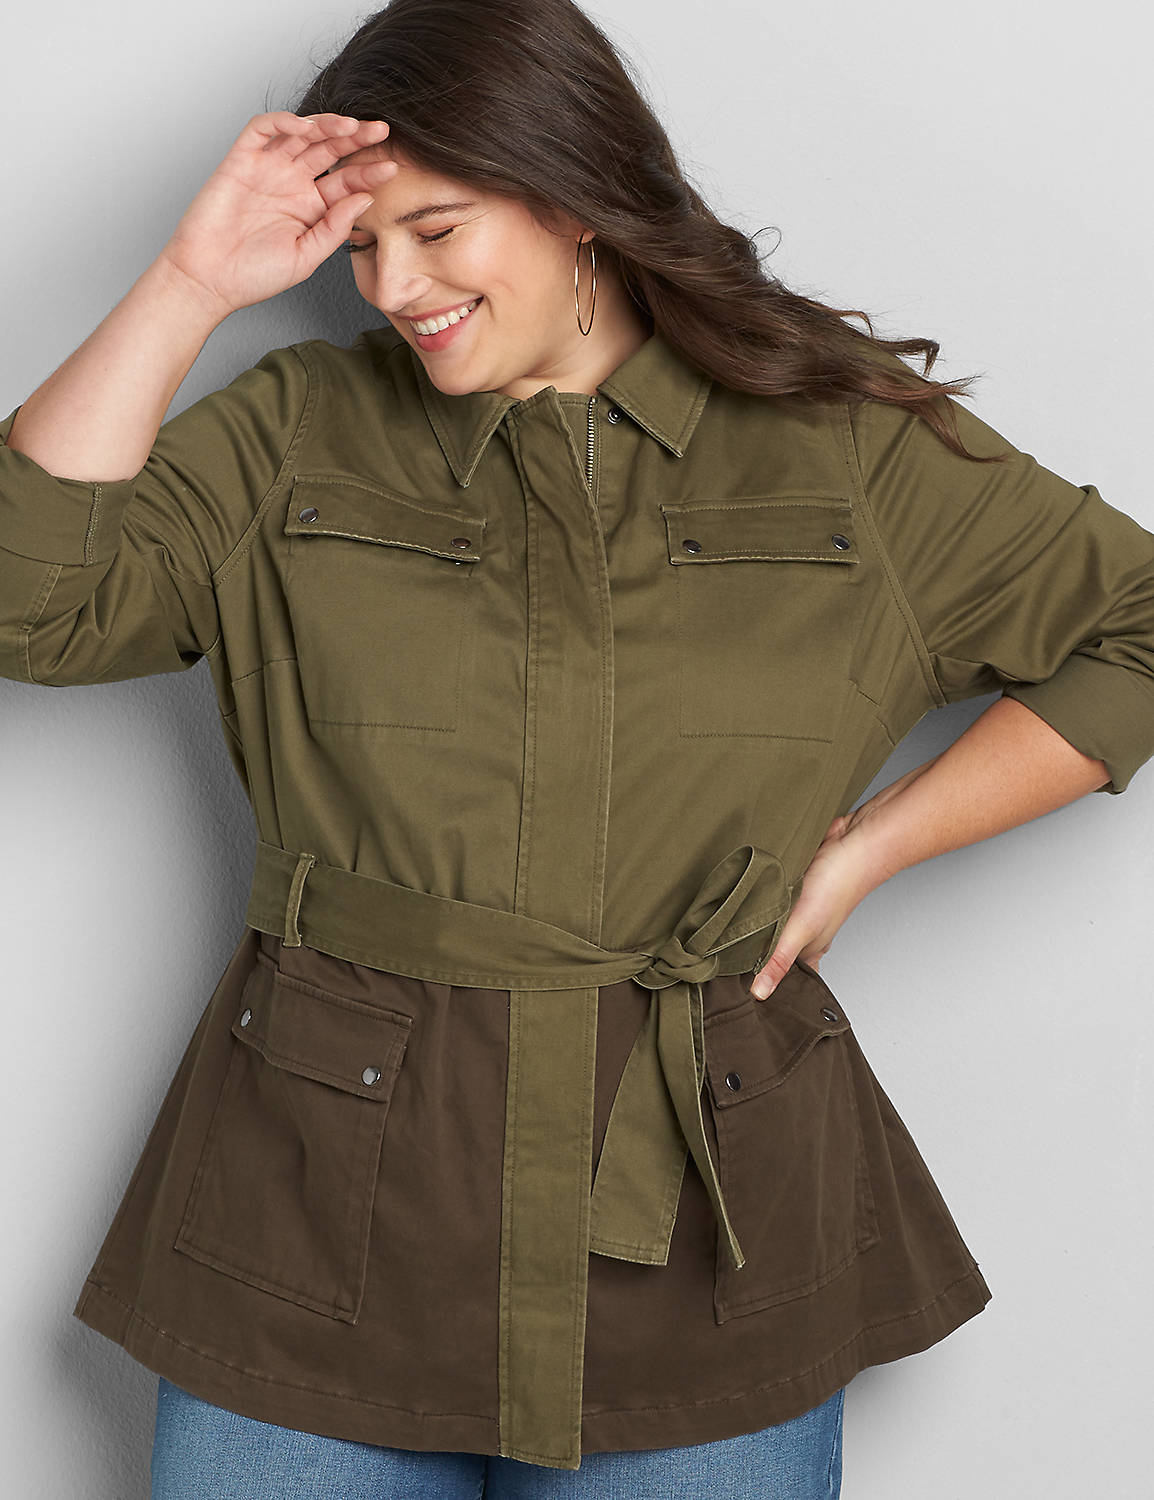 TWO TONE BELTED ANORAK 1118315 Product Image 1